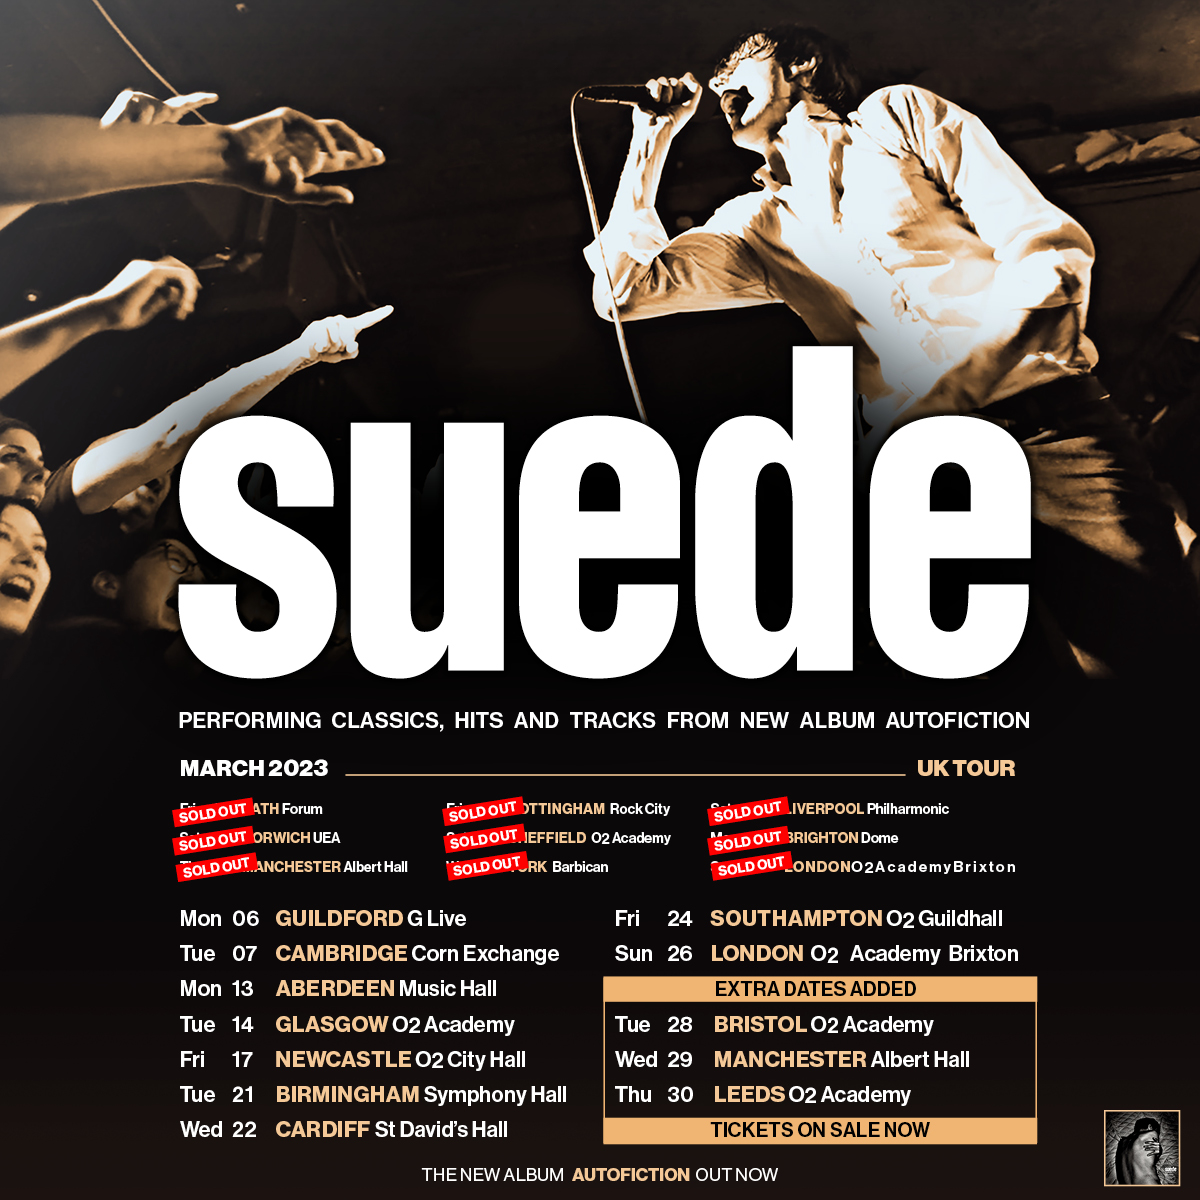 Tickets for Suede's new shows in Bristol, Manchester, and Leeds are now on sale: sjm.lnk.to/Suede. These dates are part of Suede's March 2023 tour, and will see the band performing classic, hits, and tracks from UK #2 record AUTOFICTION. See you down the front. -SuedeHQ